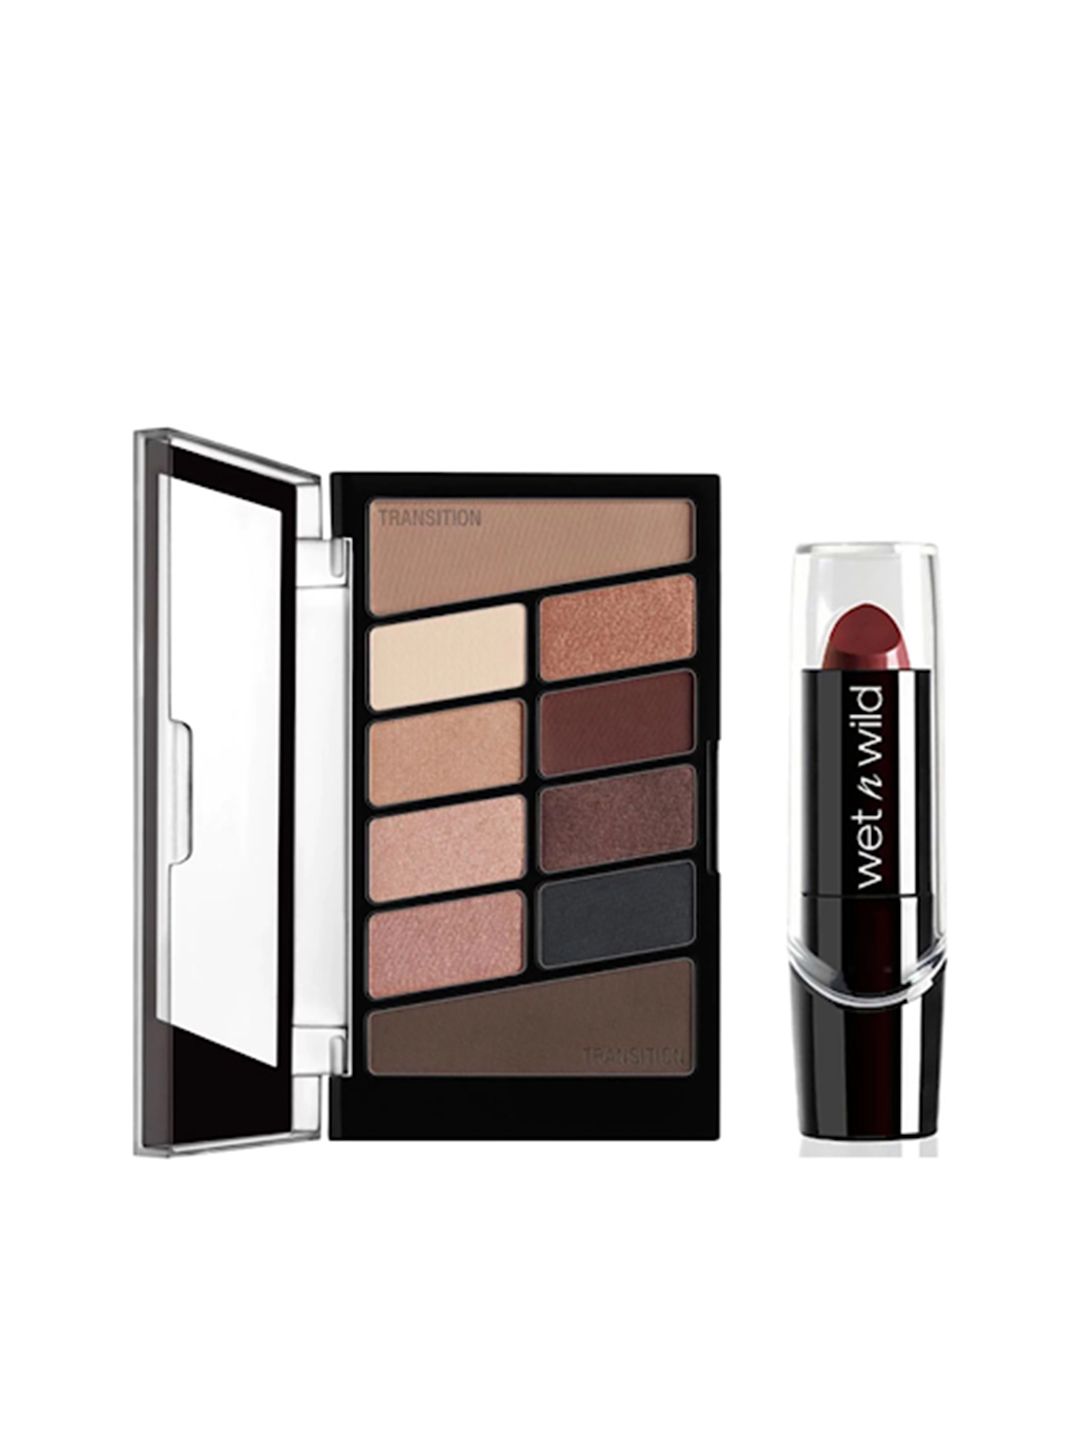 Wet n Wild Sustainable Set of Silk Finish Lipstick & Color Icon 10 Pan Eyeshadow Palette Price in India